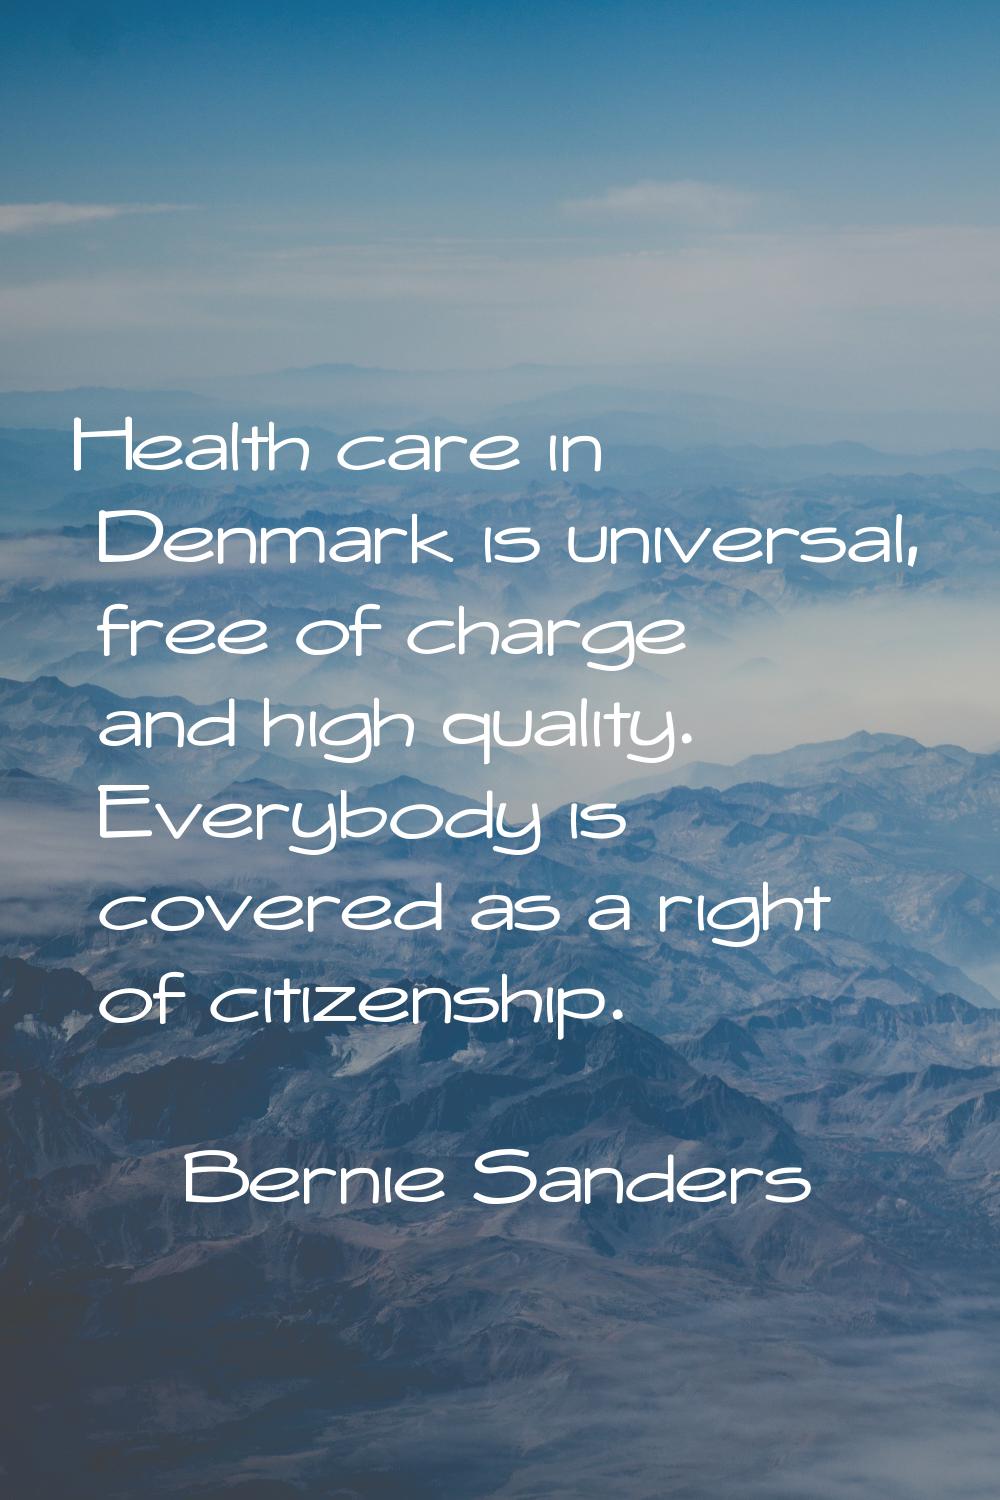 Health care in Denmark is universal, free of charge and high quality. Everybody is covered as a rig